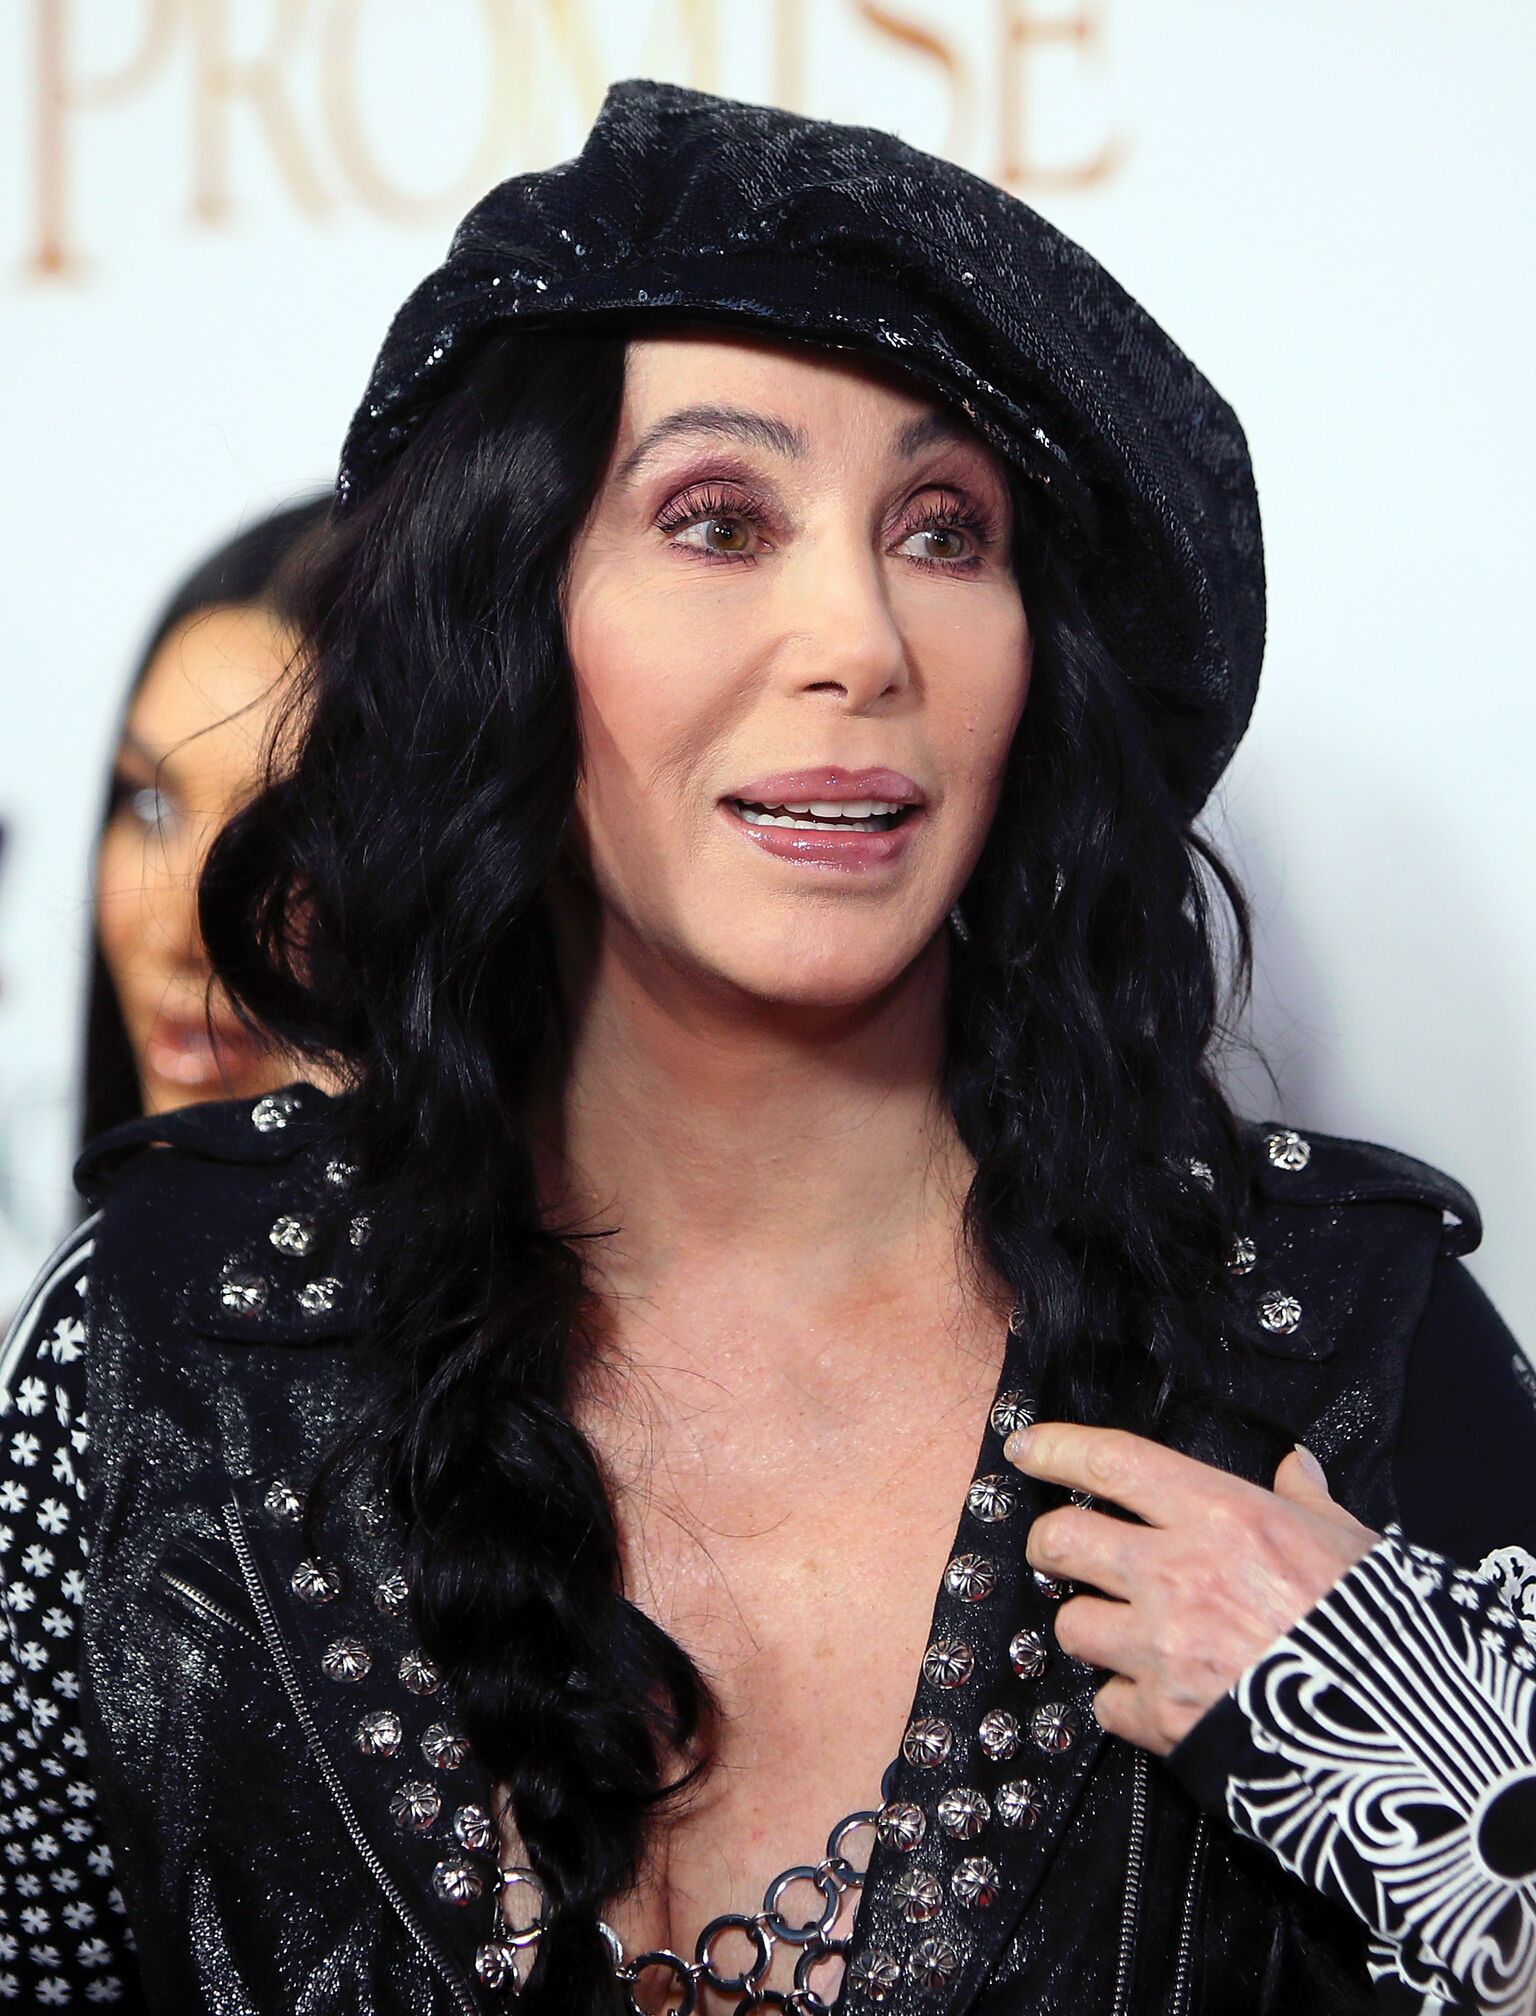 Cher Becomes New Face of Fashion Brand DSquared2 at the Age of 73